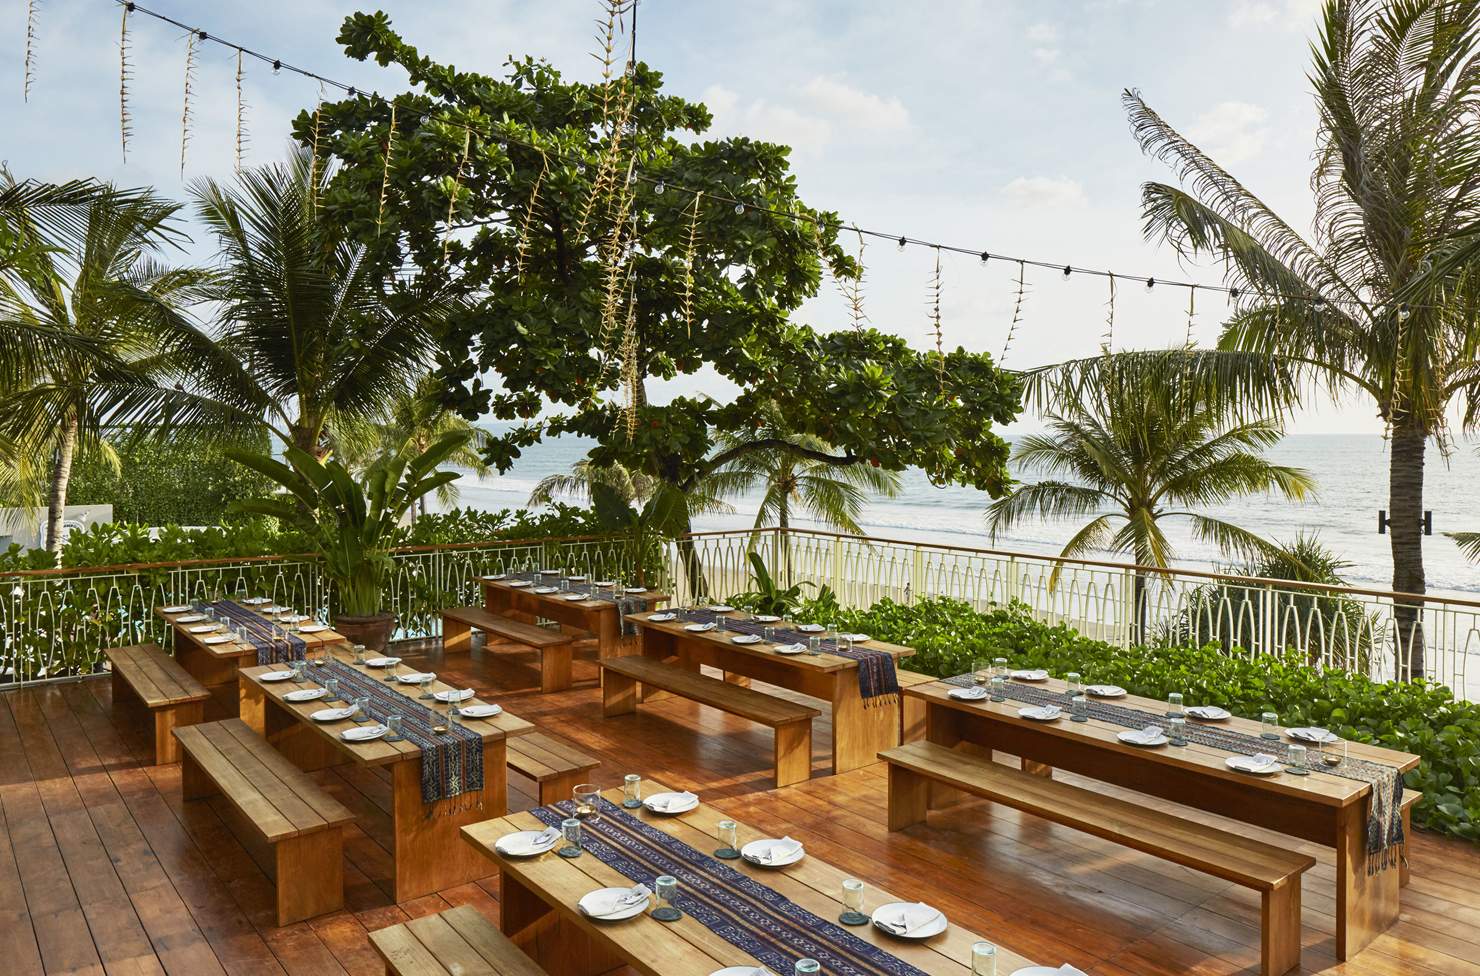 an open air deck overlooking the ocean with long wooden tables and benches